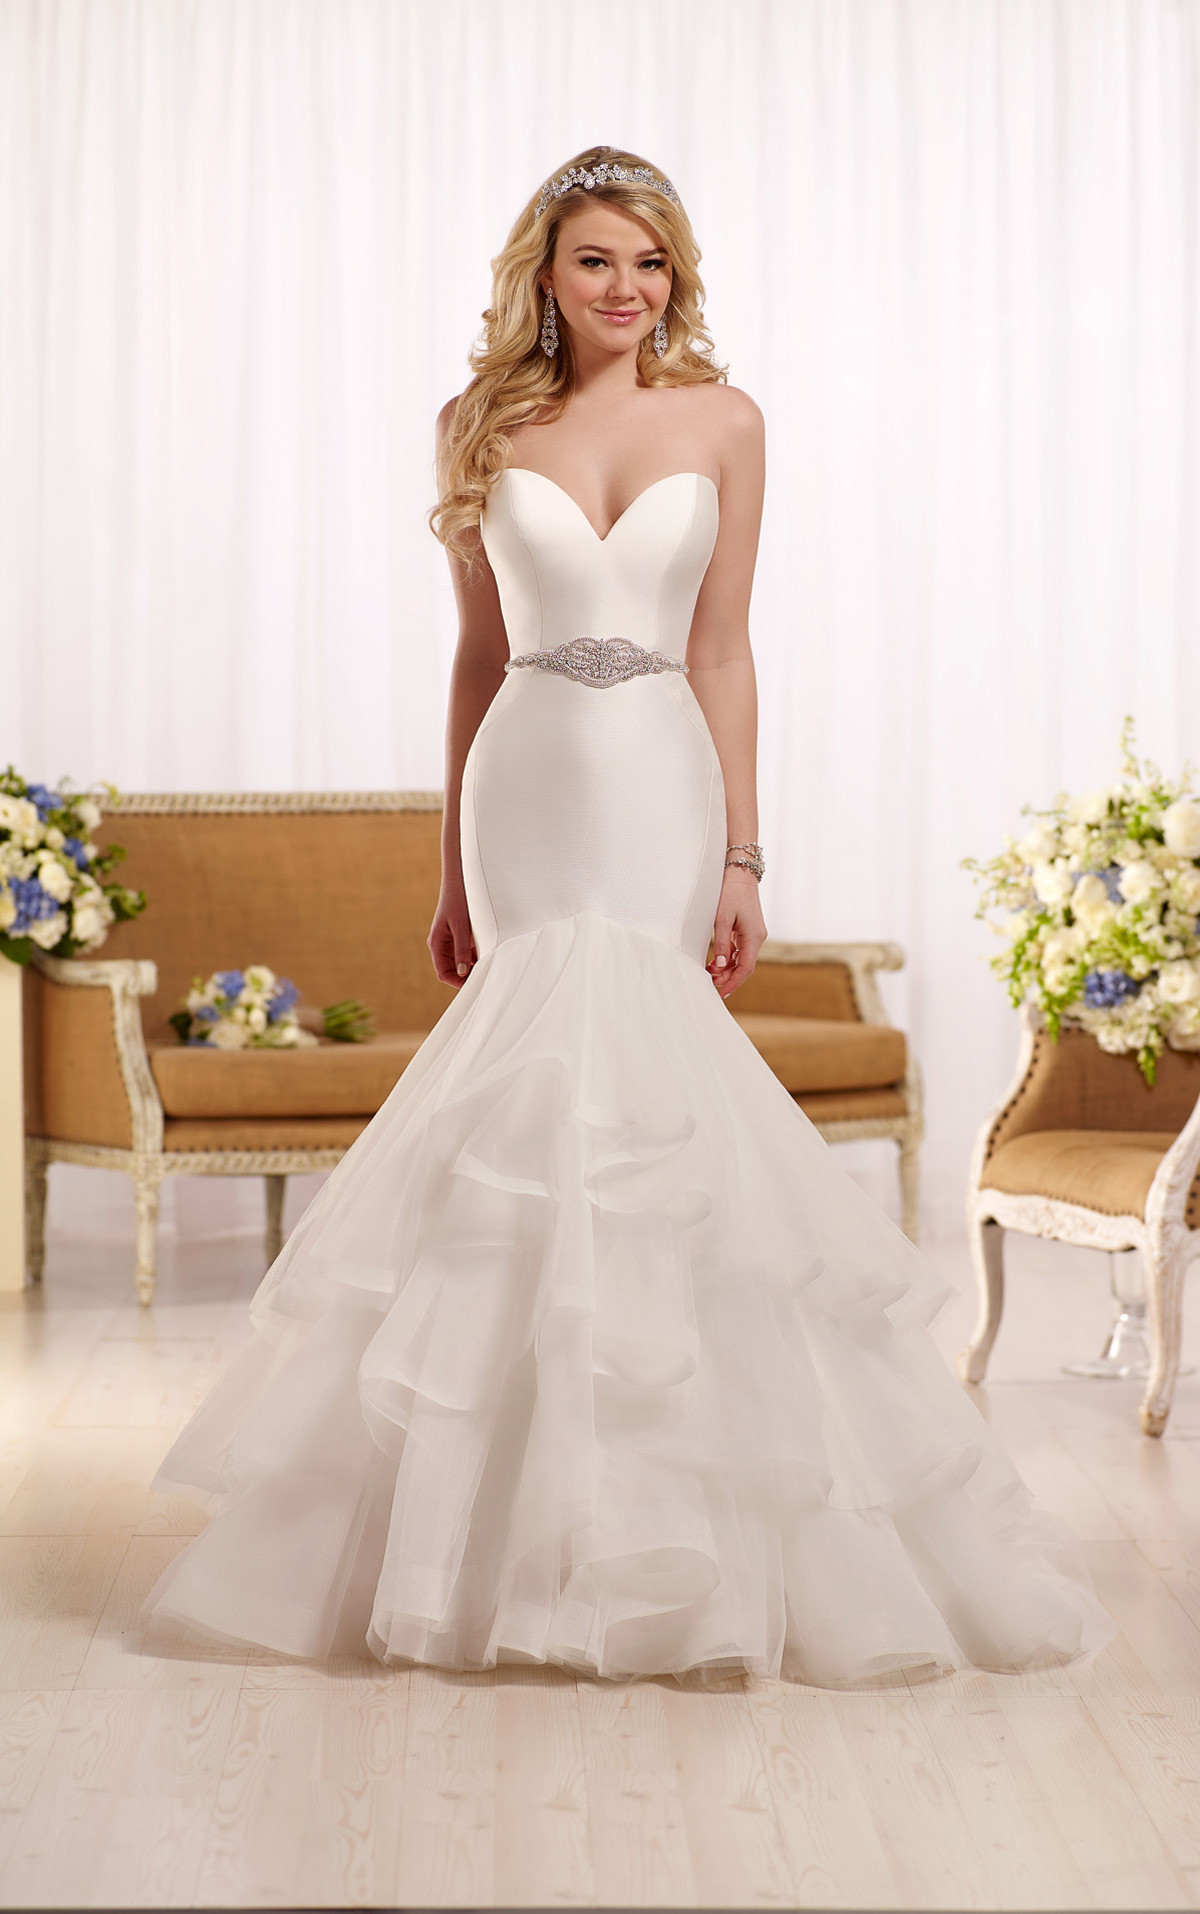 Sweetheart Wedding Gown
 Fit and Flare Wedding Dress with Sweetheart Neckline